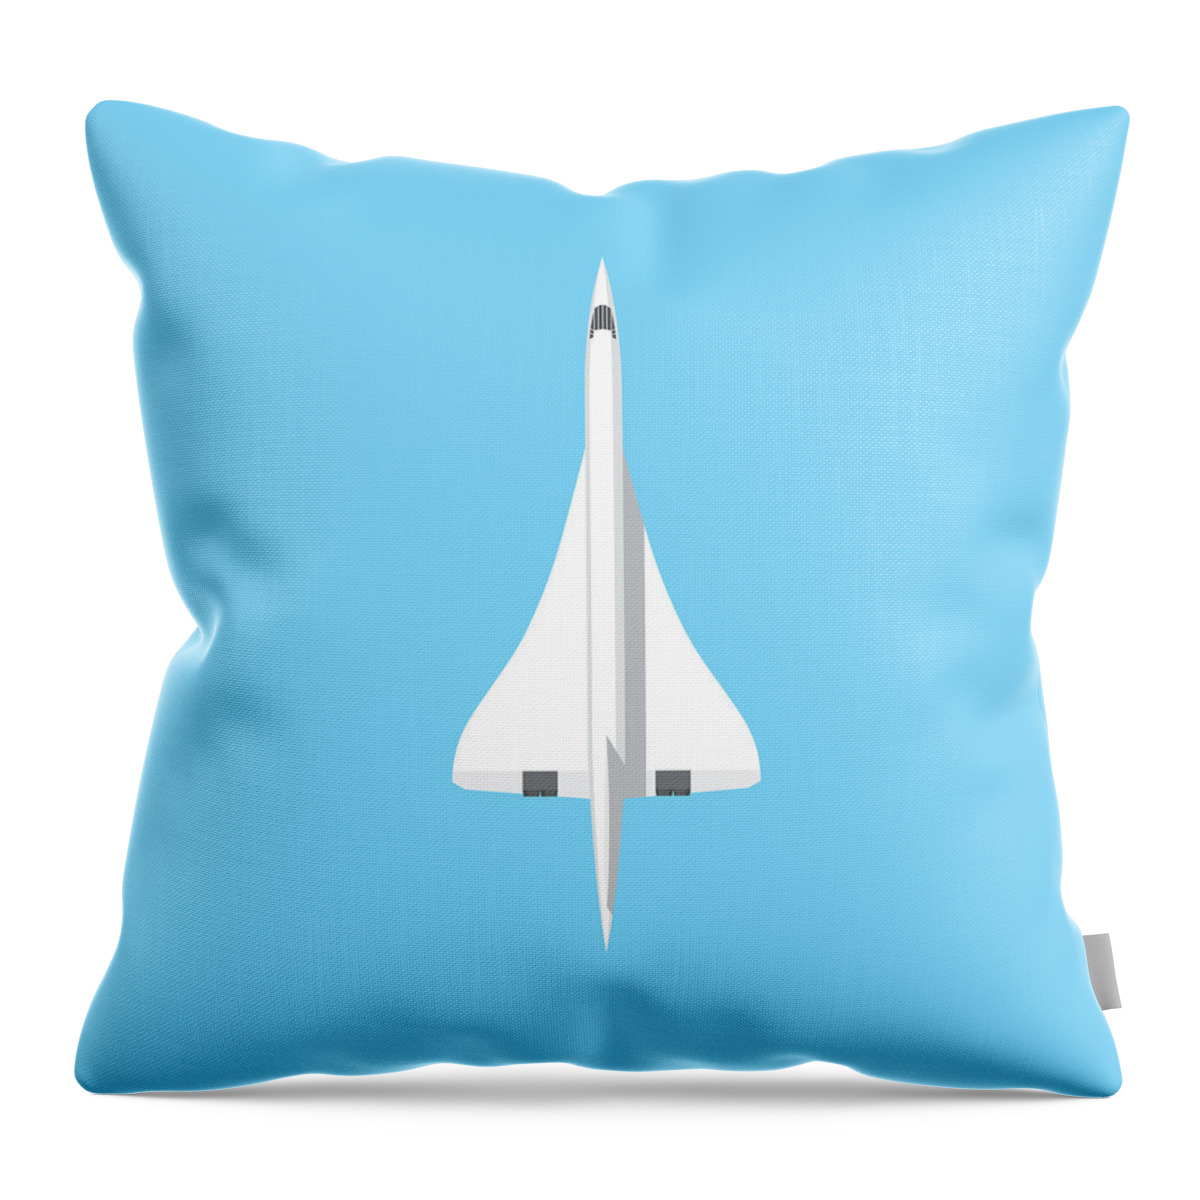 Concorde Throw Pillow featuring the digital art Concorde jet airliner - Sky by Organic Synthesis